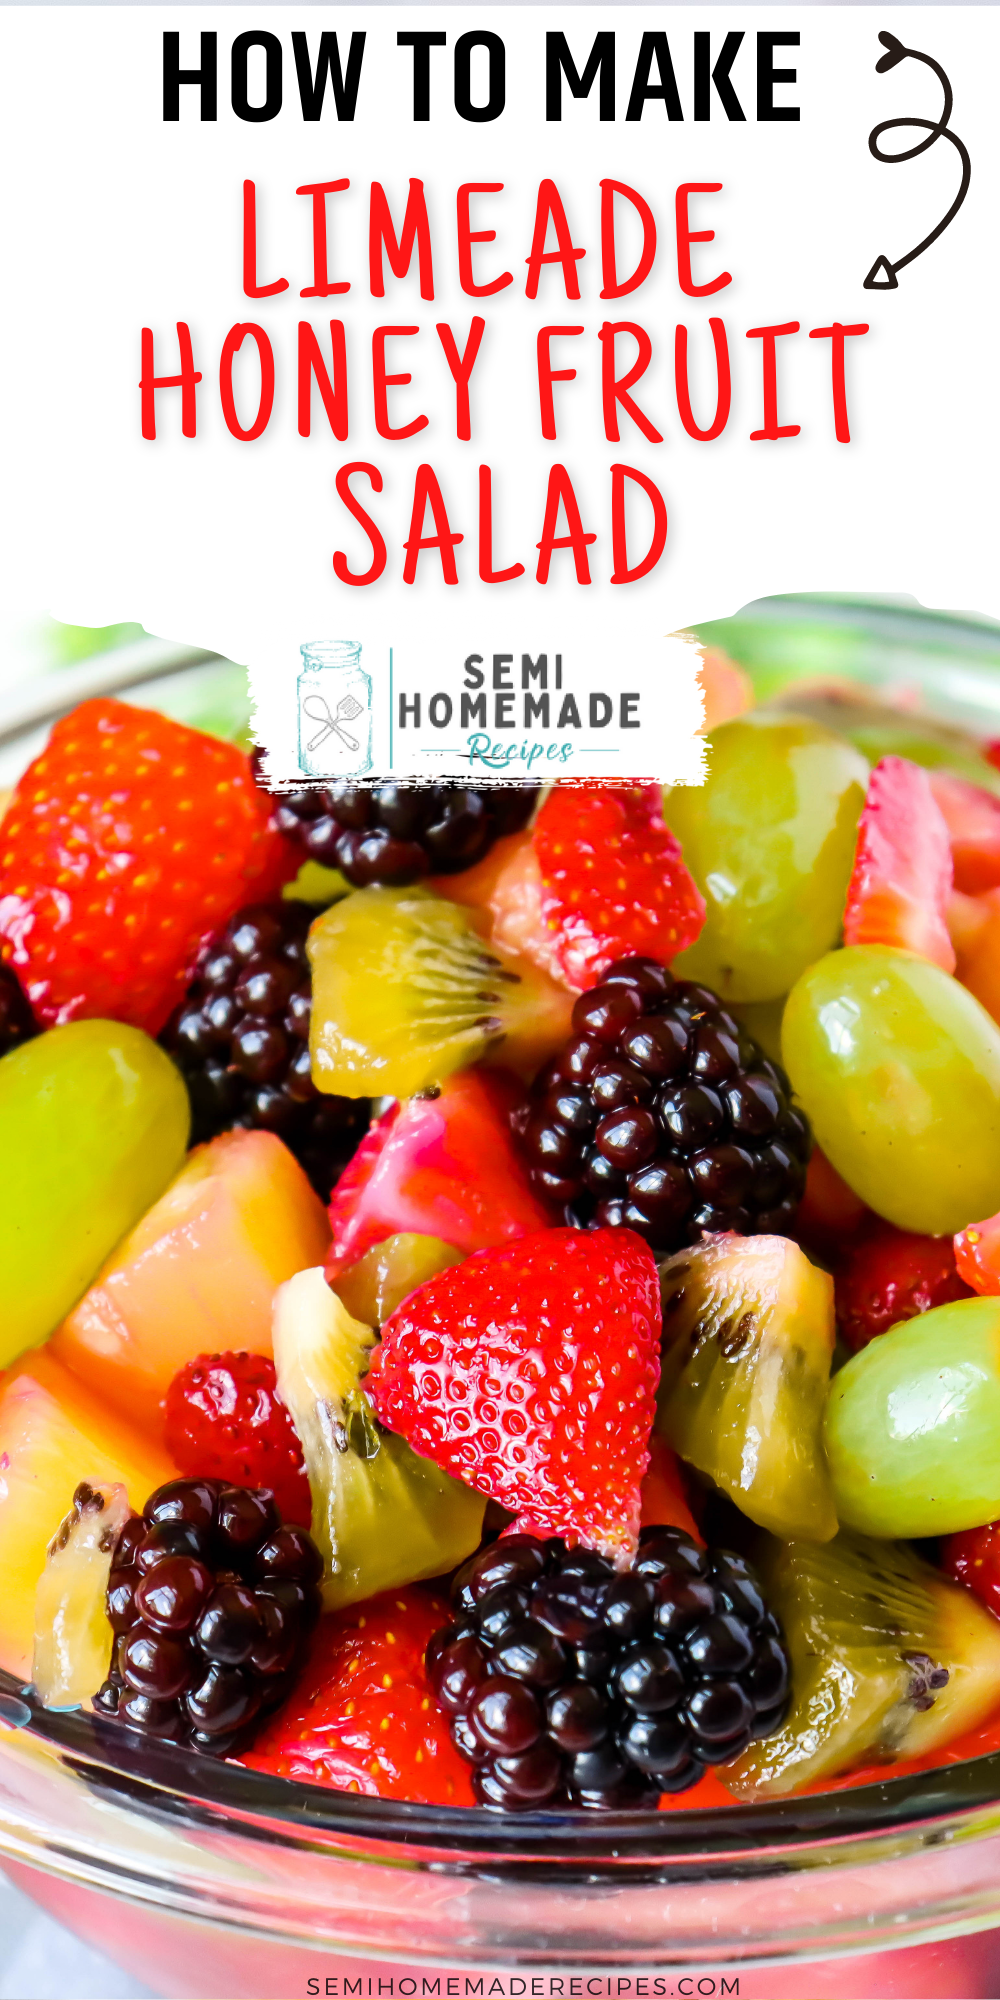 Limeade Honey Fruit Salad - This fresh, sweet and sour mixed fruit salad is perfect for cooling off on a hot summer day!